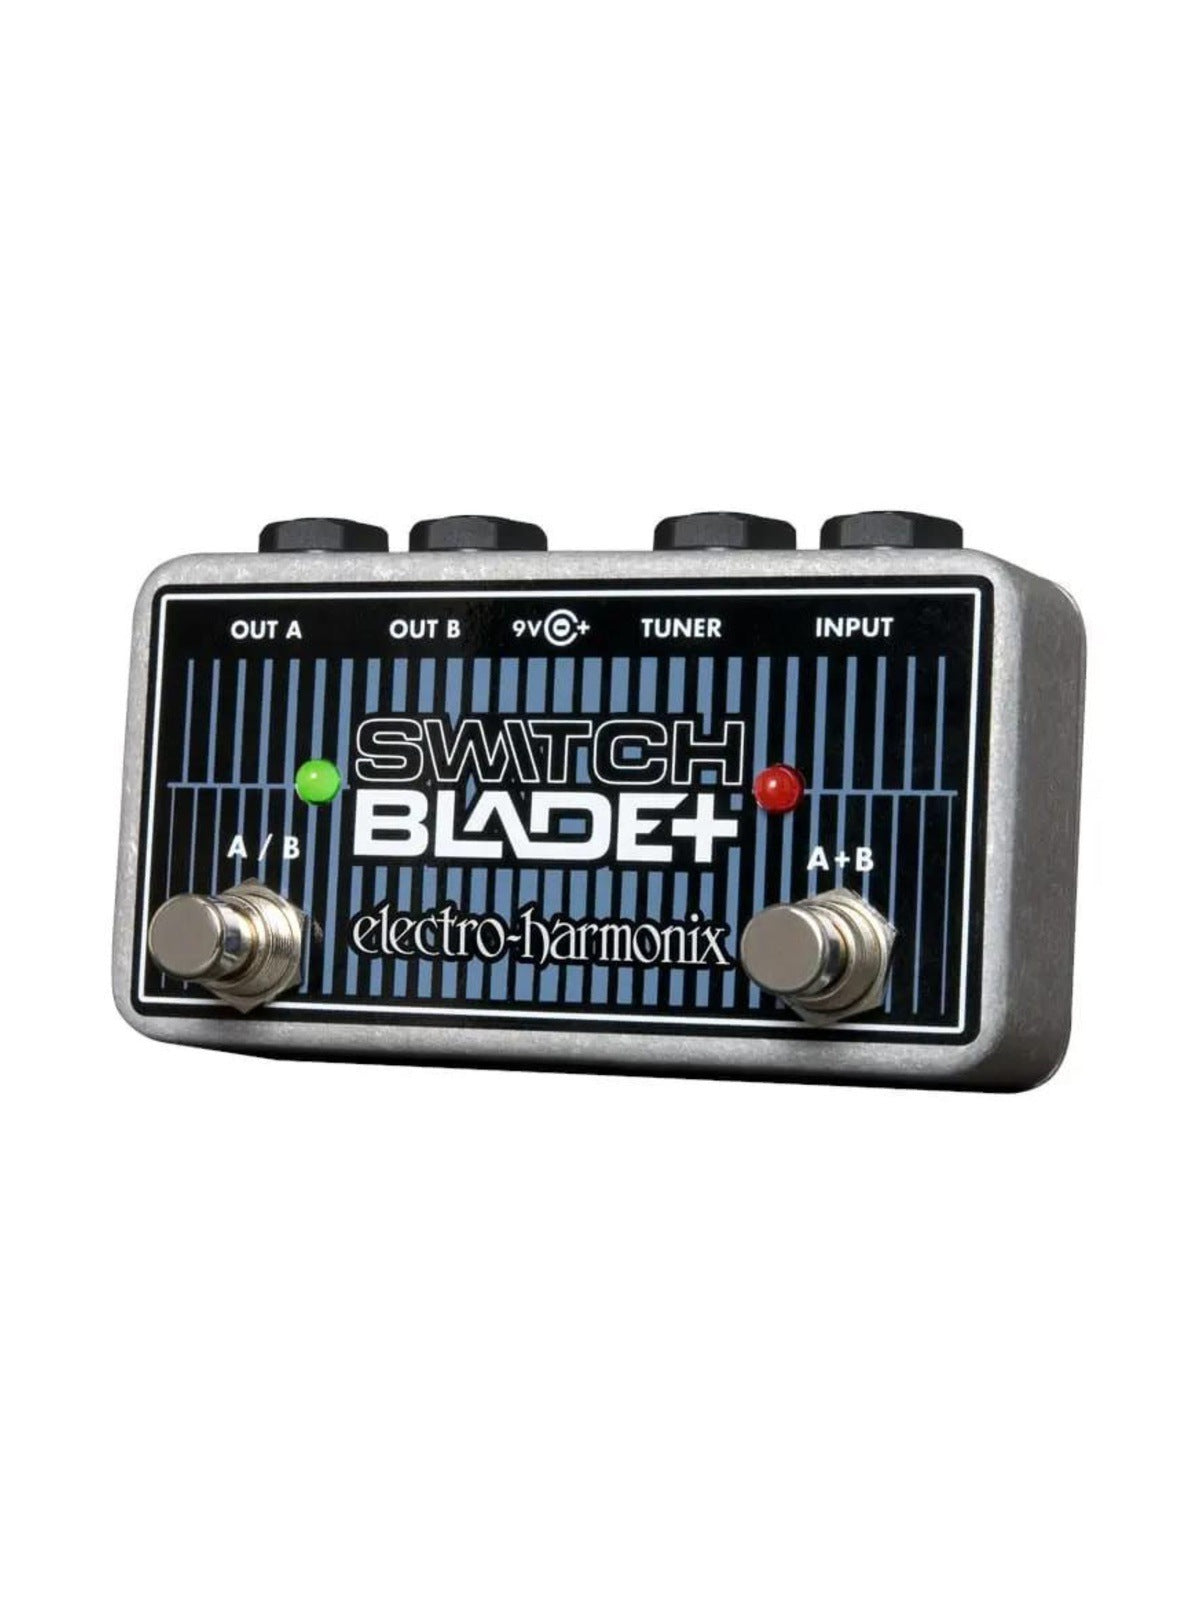 Electro Harmonix Switchblade Plus Channel Selector Pedal